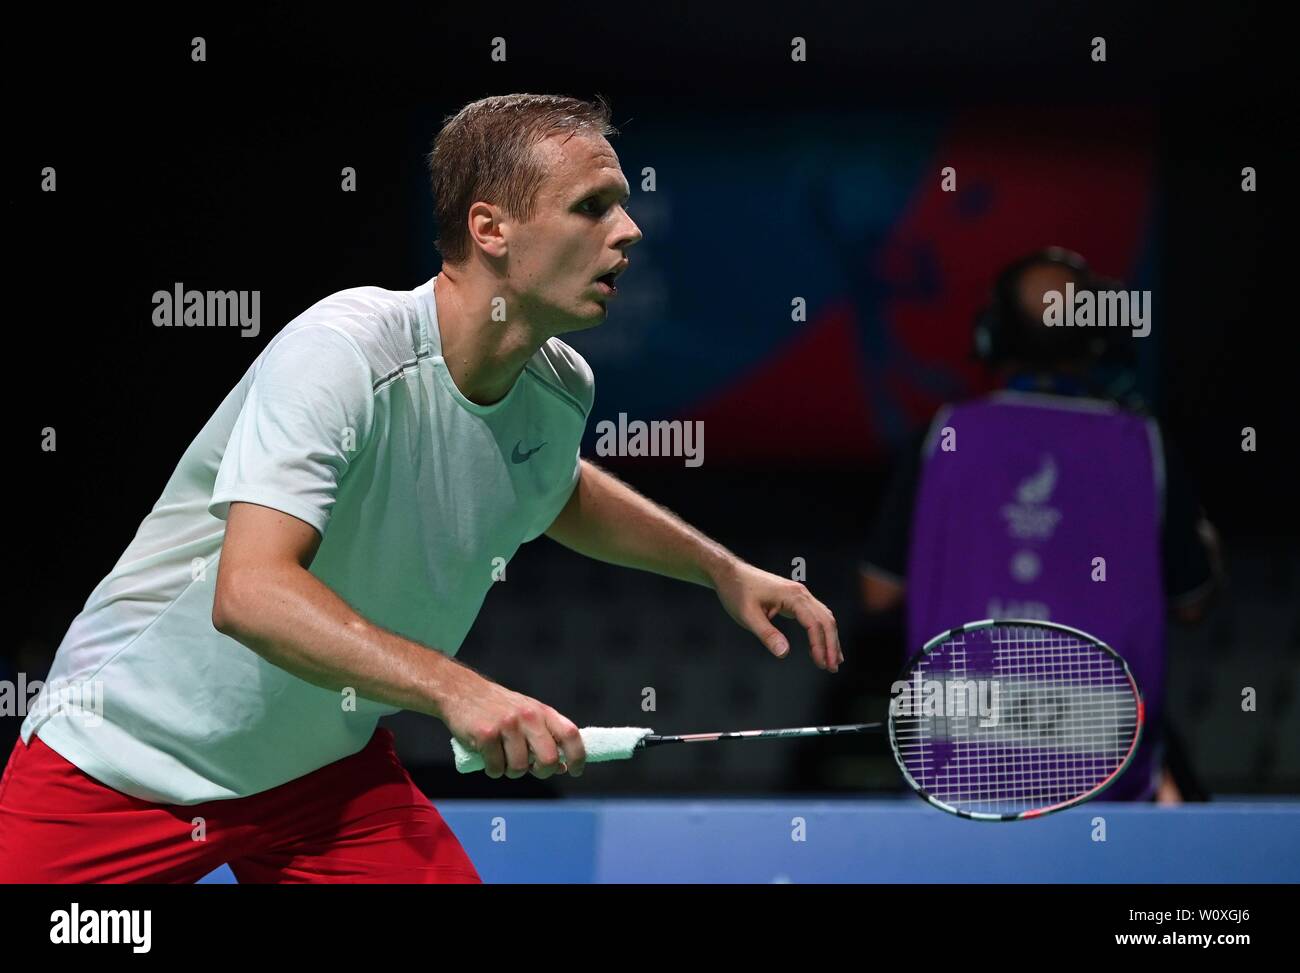 Minsk, Belarus. 28th June, 2019. Raul Must (EST) taking part in the Badminton tournament at the 2nd European games. Credit Garry Bowden/SIP photo agency/Alamy live news. Stock Photo